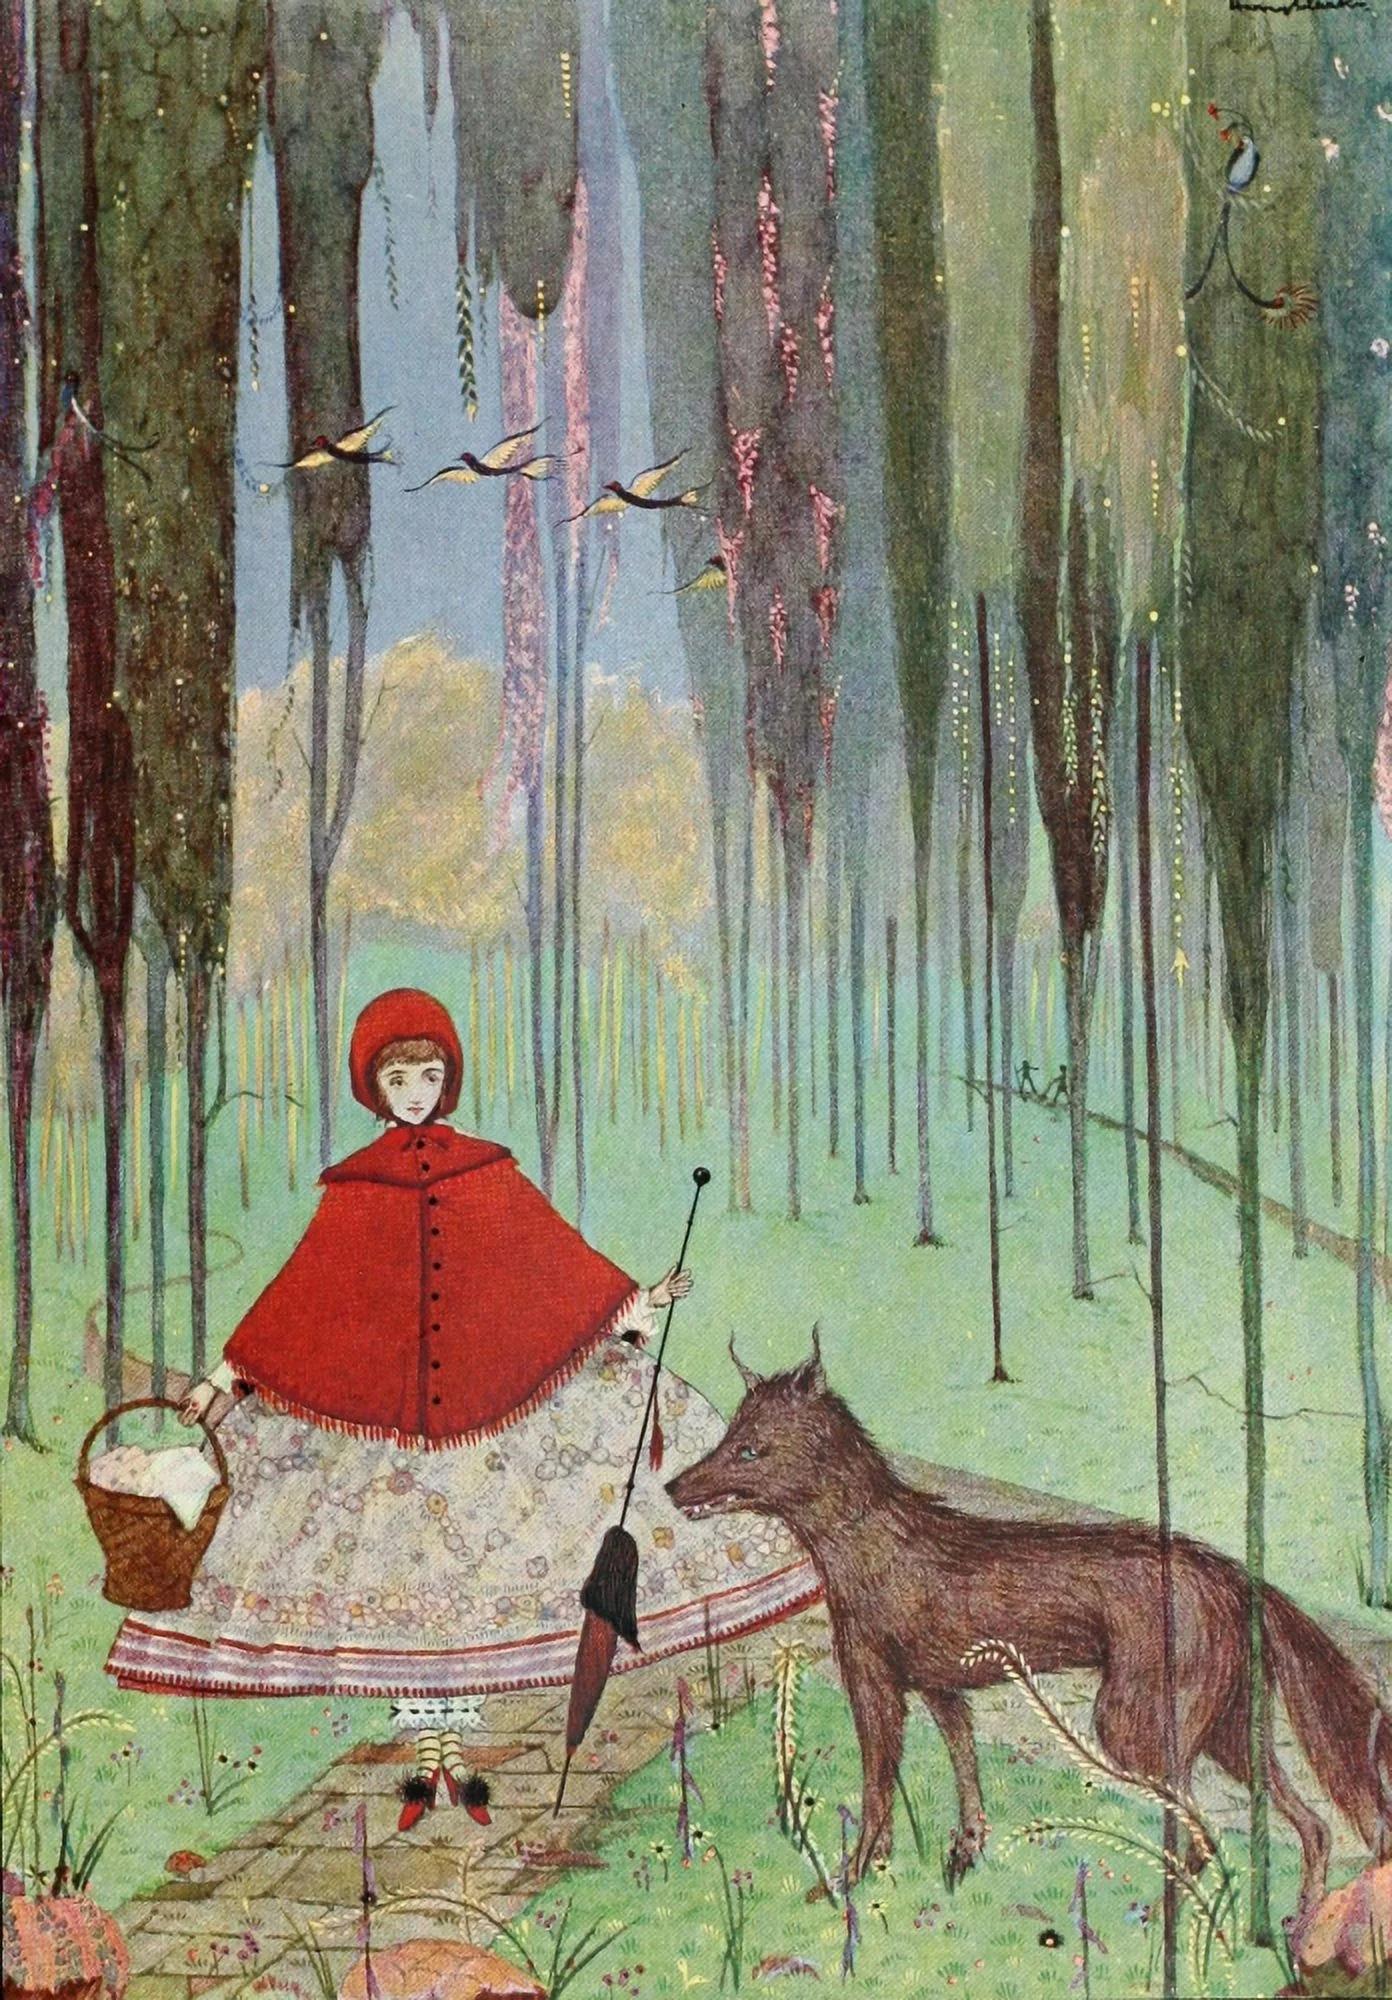 The-Fairy-Tales-of-Charles-Perrault-1922-Little-Red-Riding-Hood-Poster-Prineaae4e396.jpg